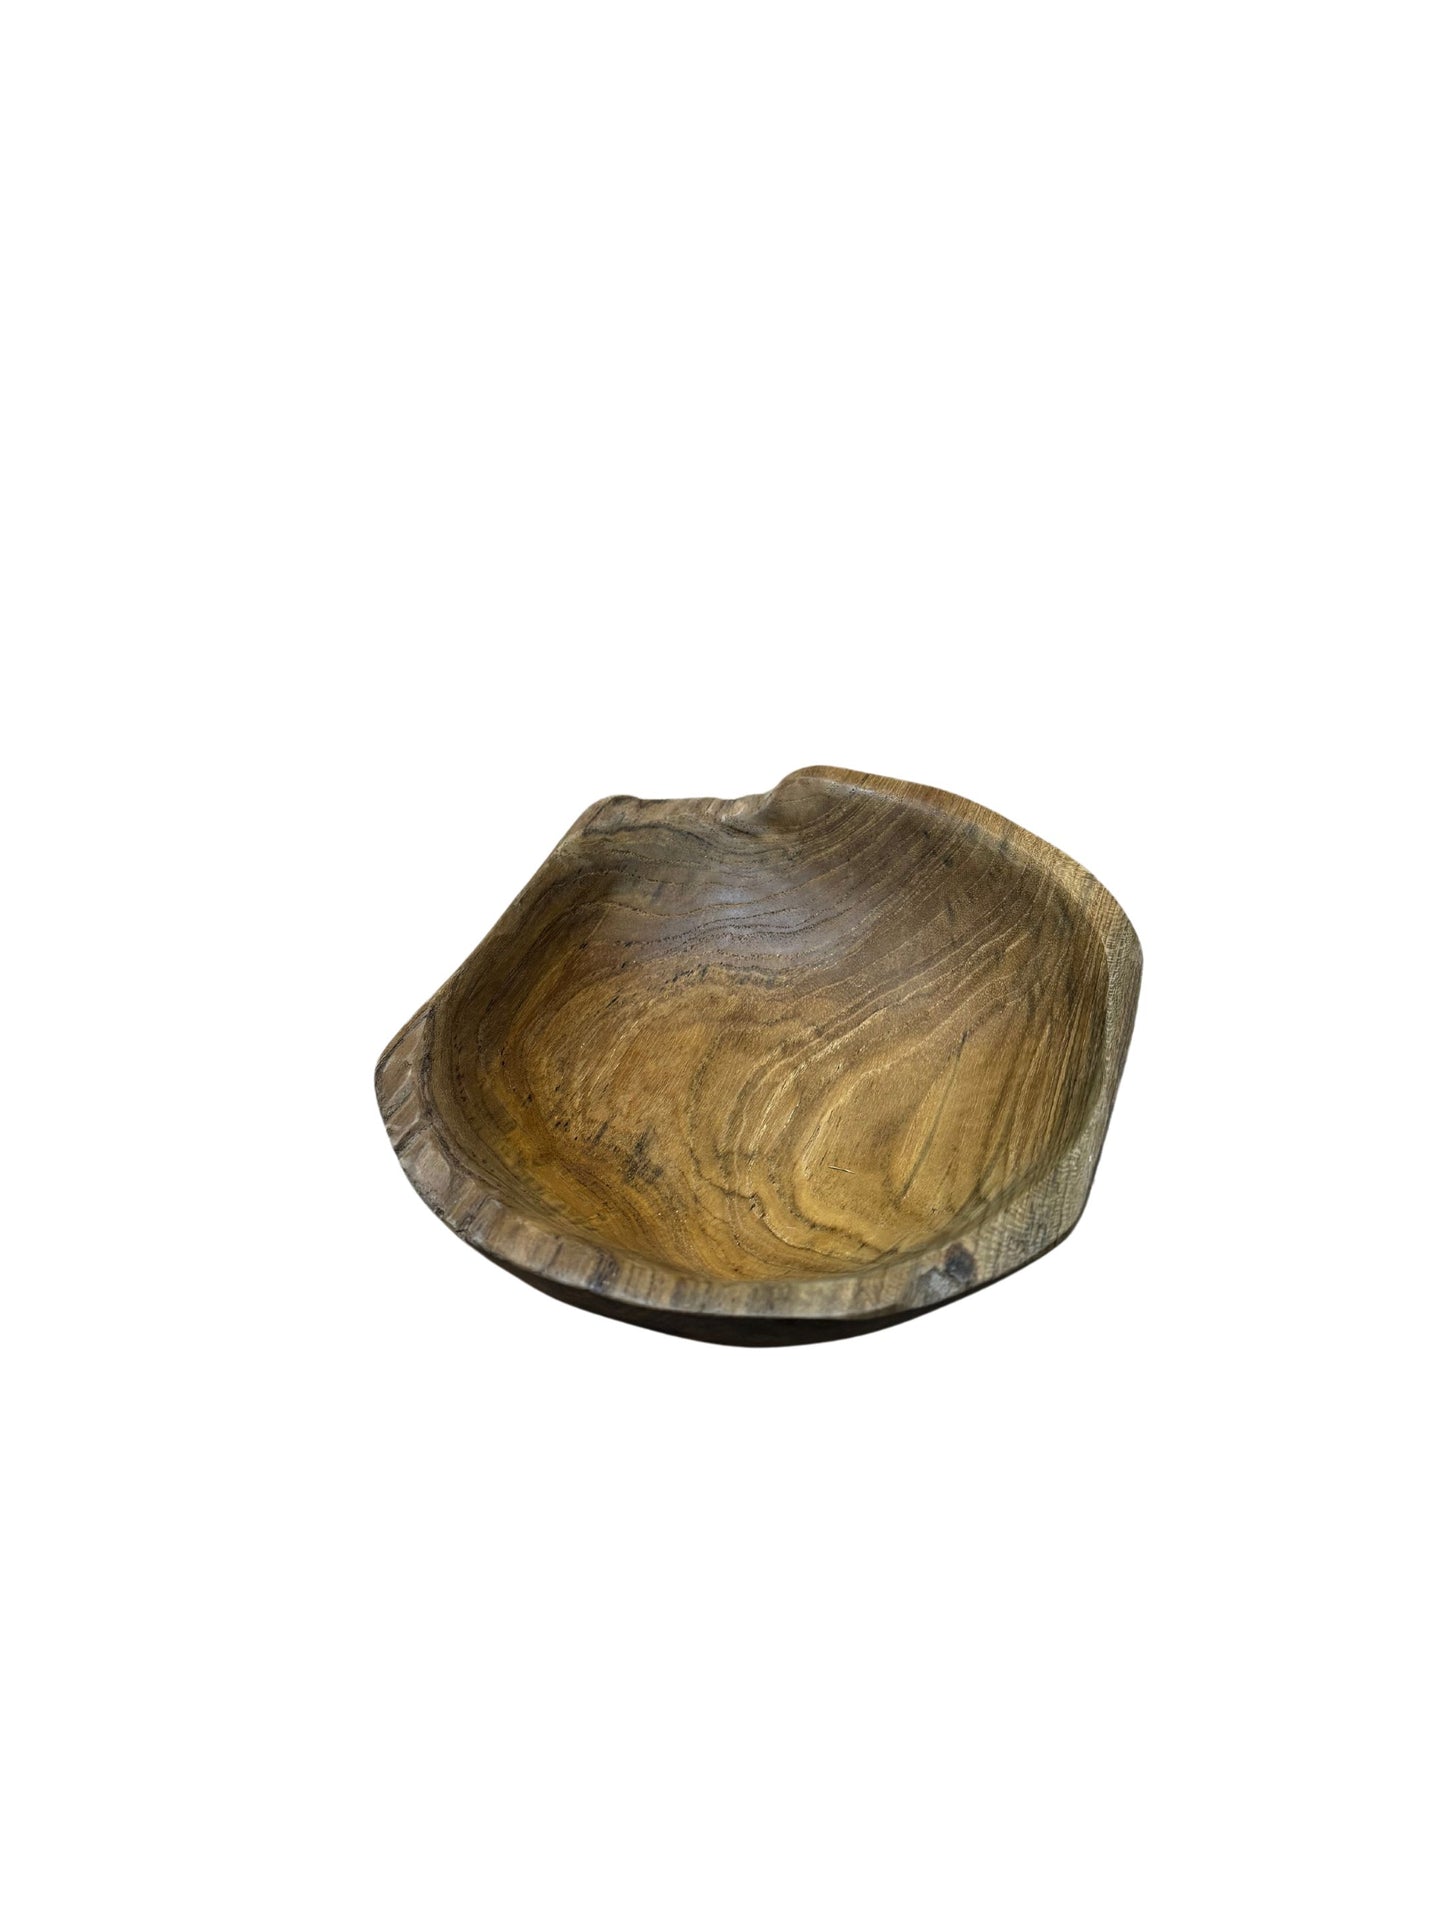 Eclectic Home Accent Teak Small Bowl 130123 Wooden Decor Furniture